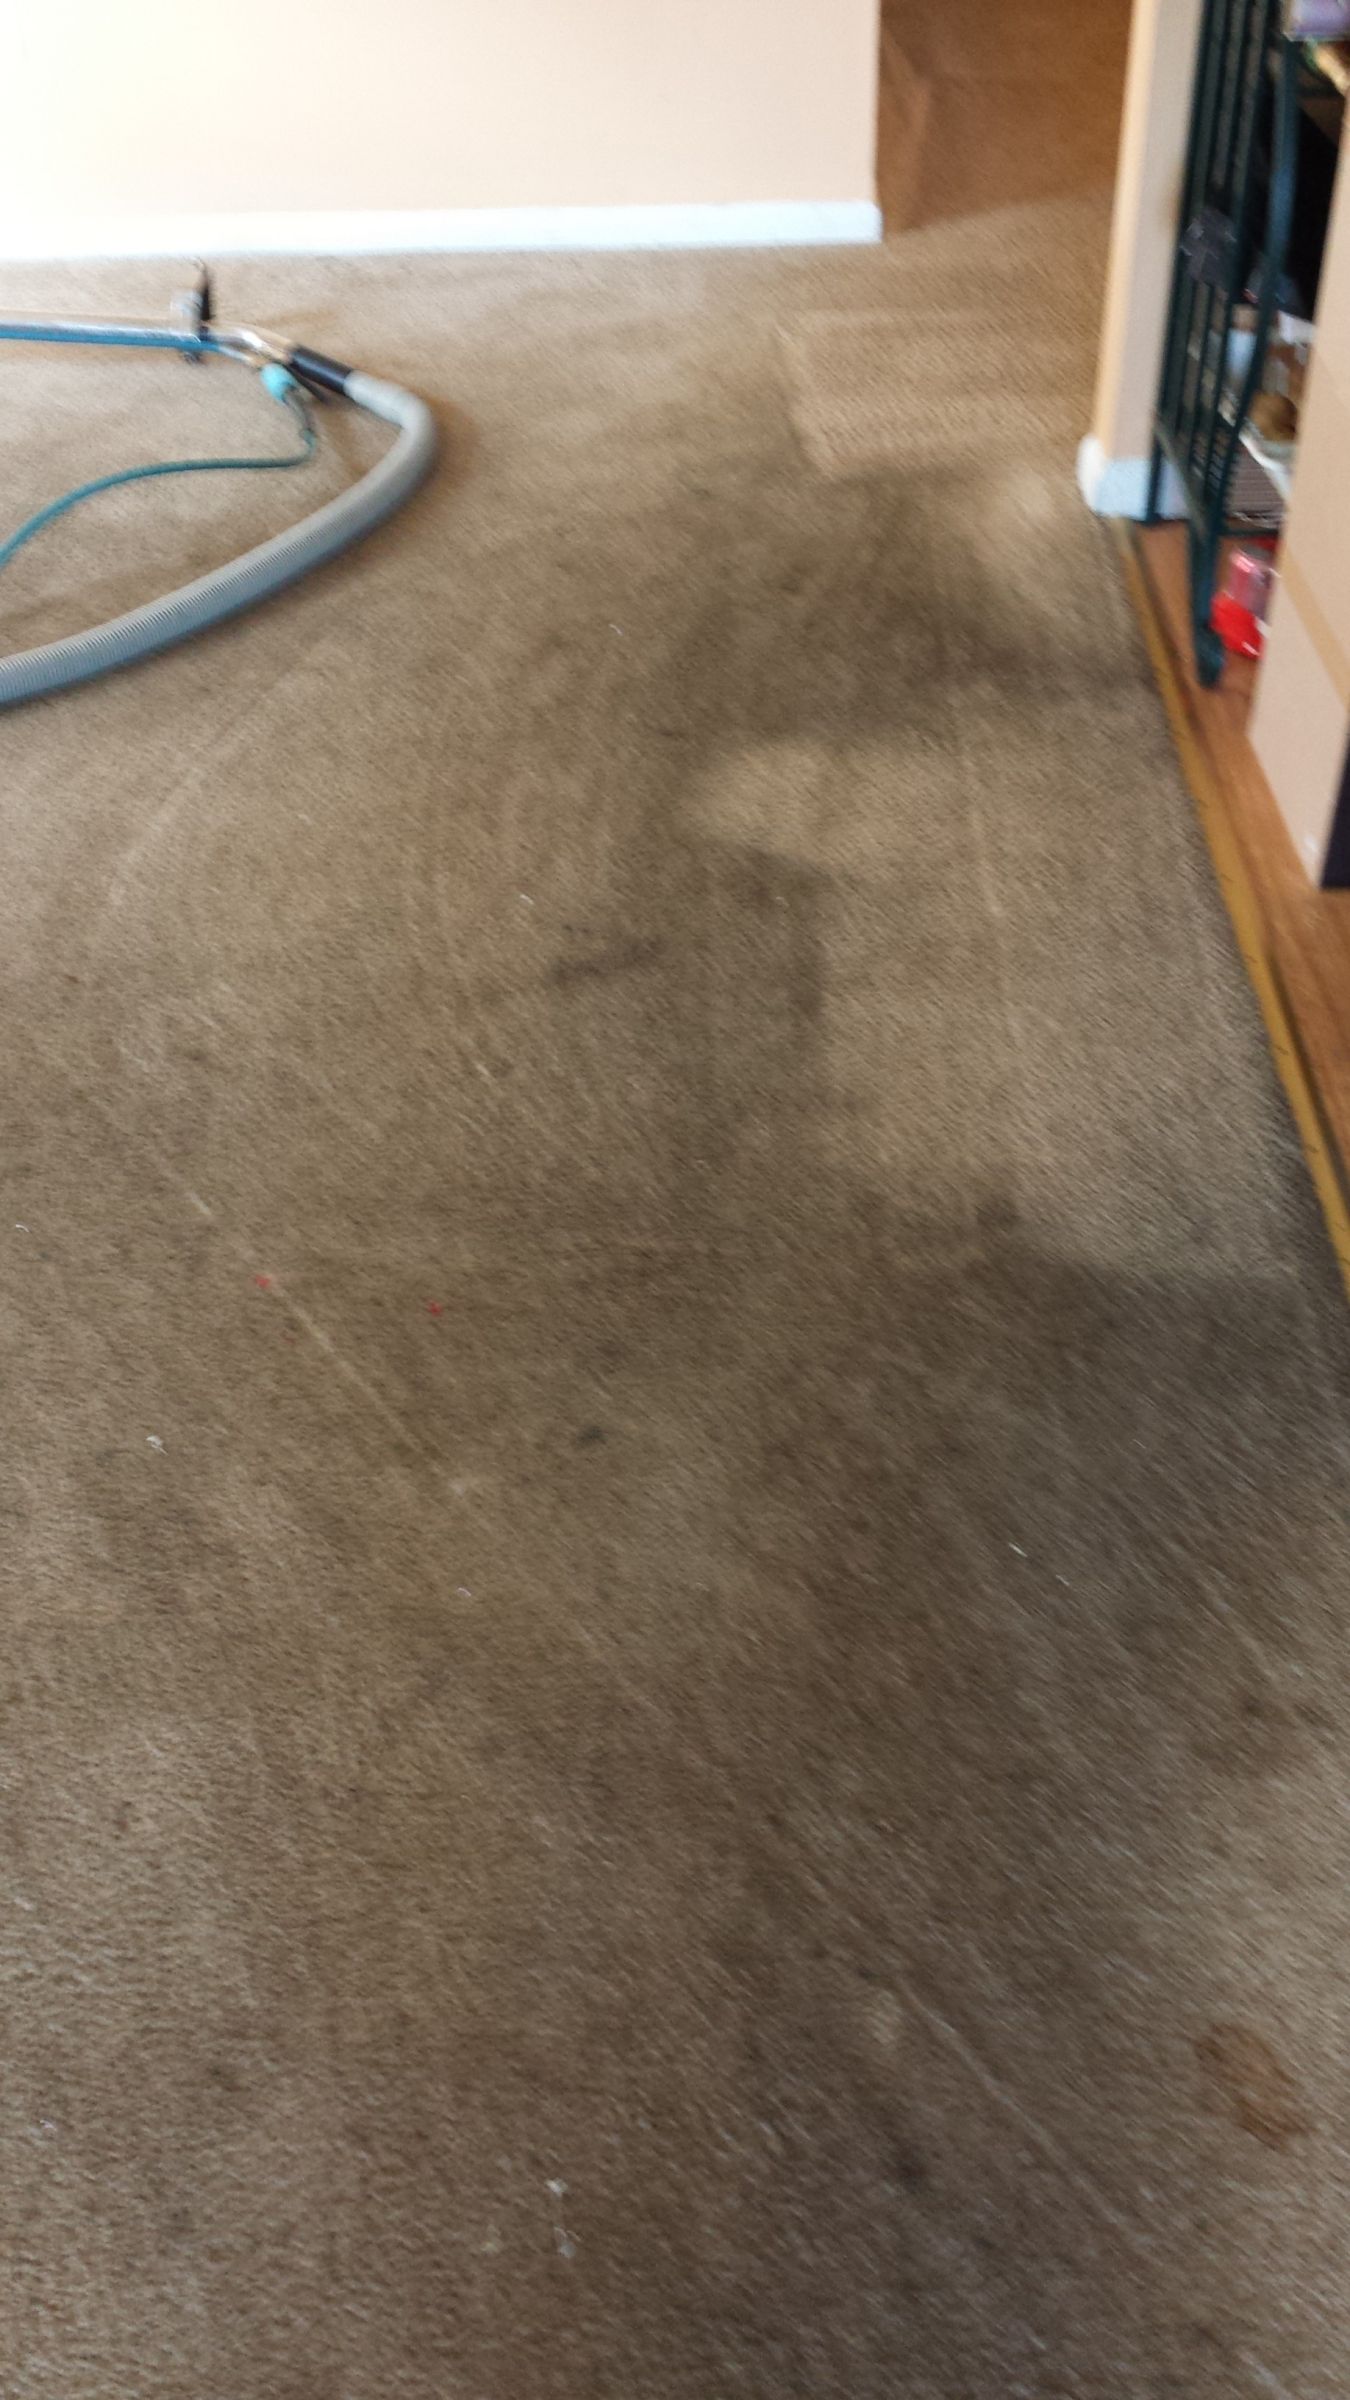 What’s Hiding In My Carpet? Cherry Hill Carpet Cleaning